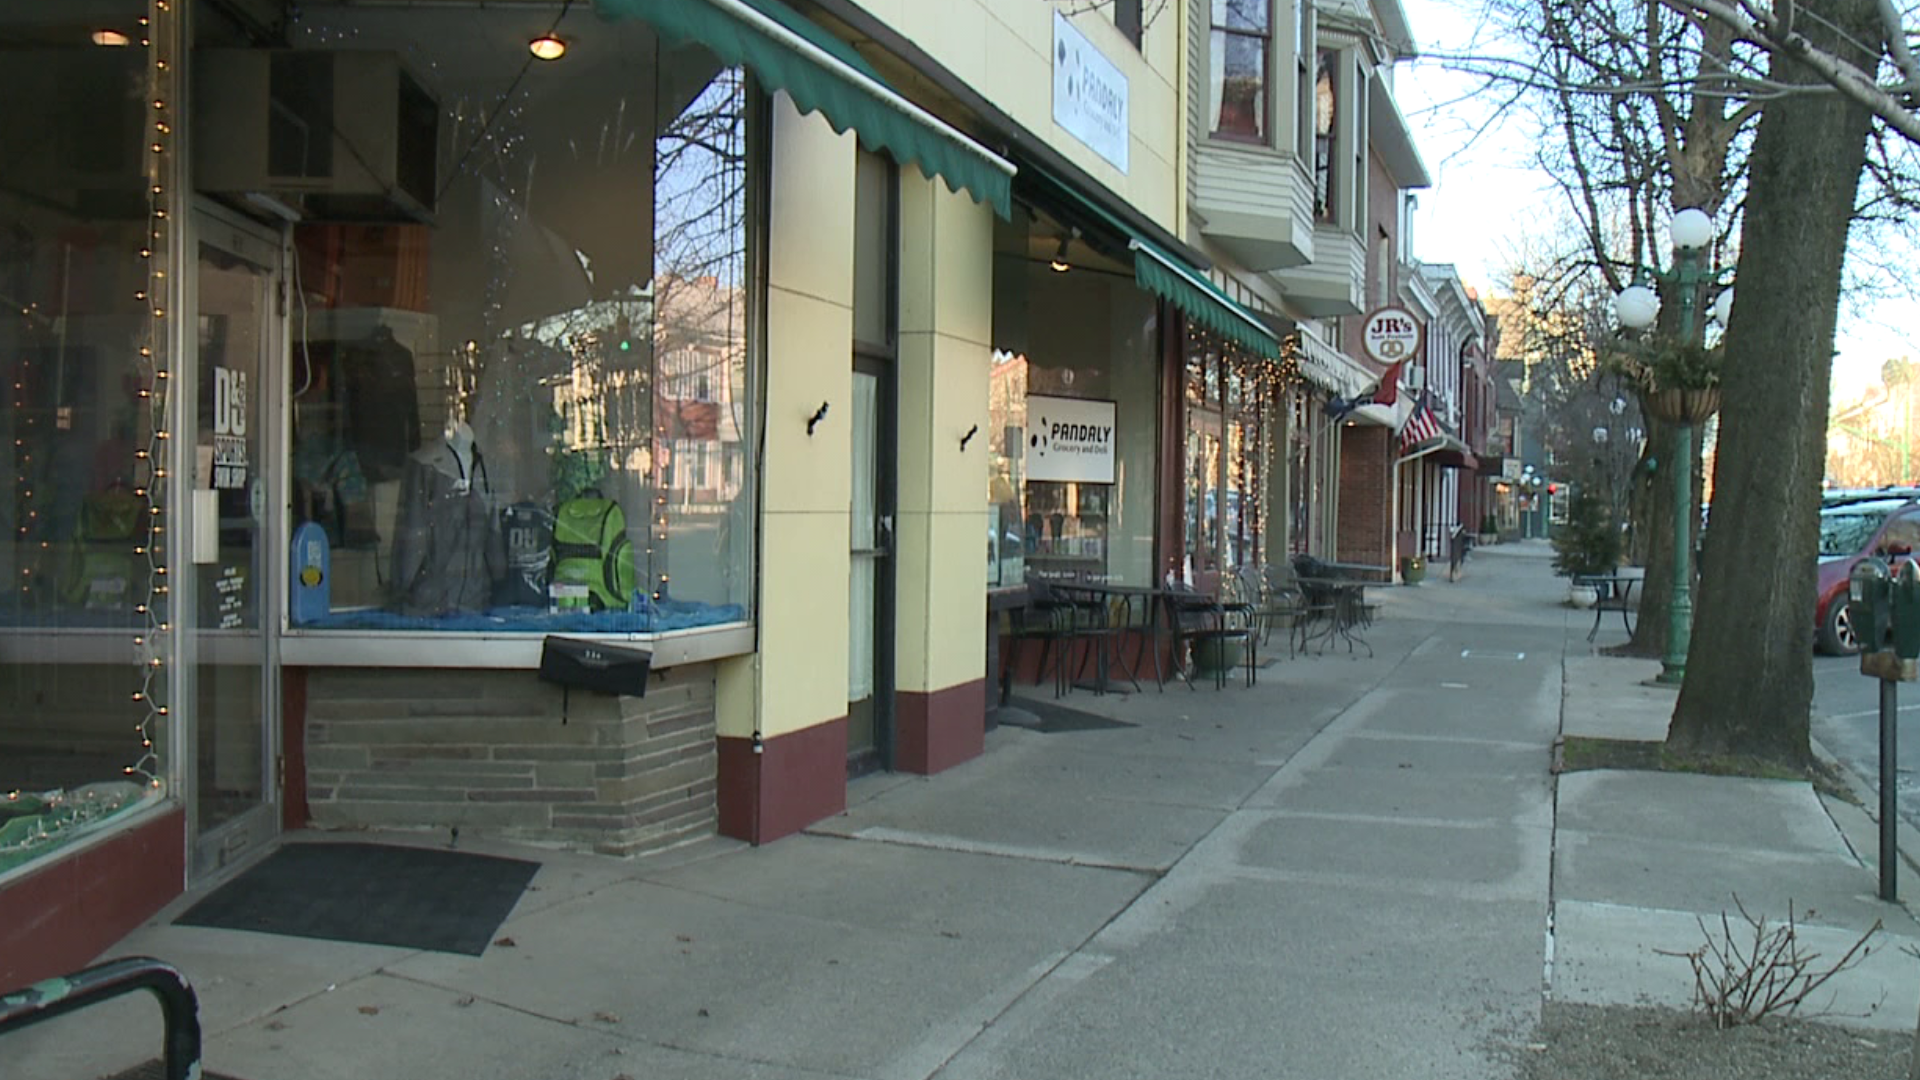 The pandemic has made it a difficult year for businesses in downtown Lewisburg.